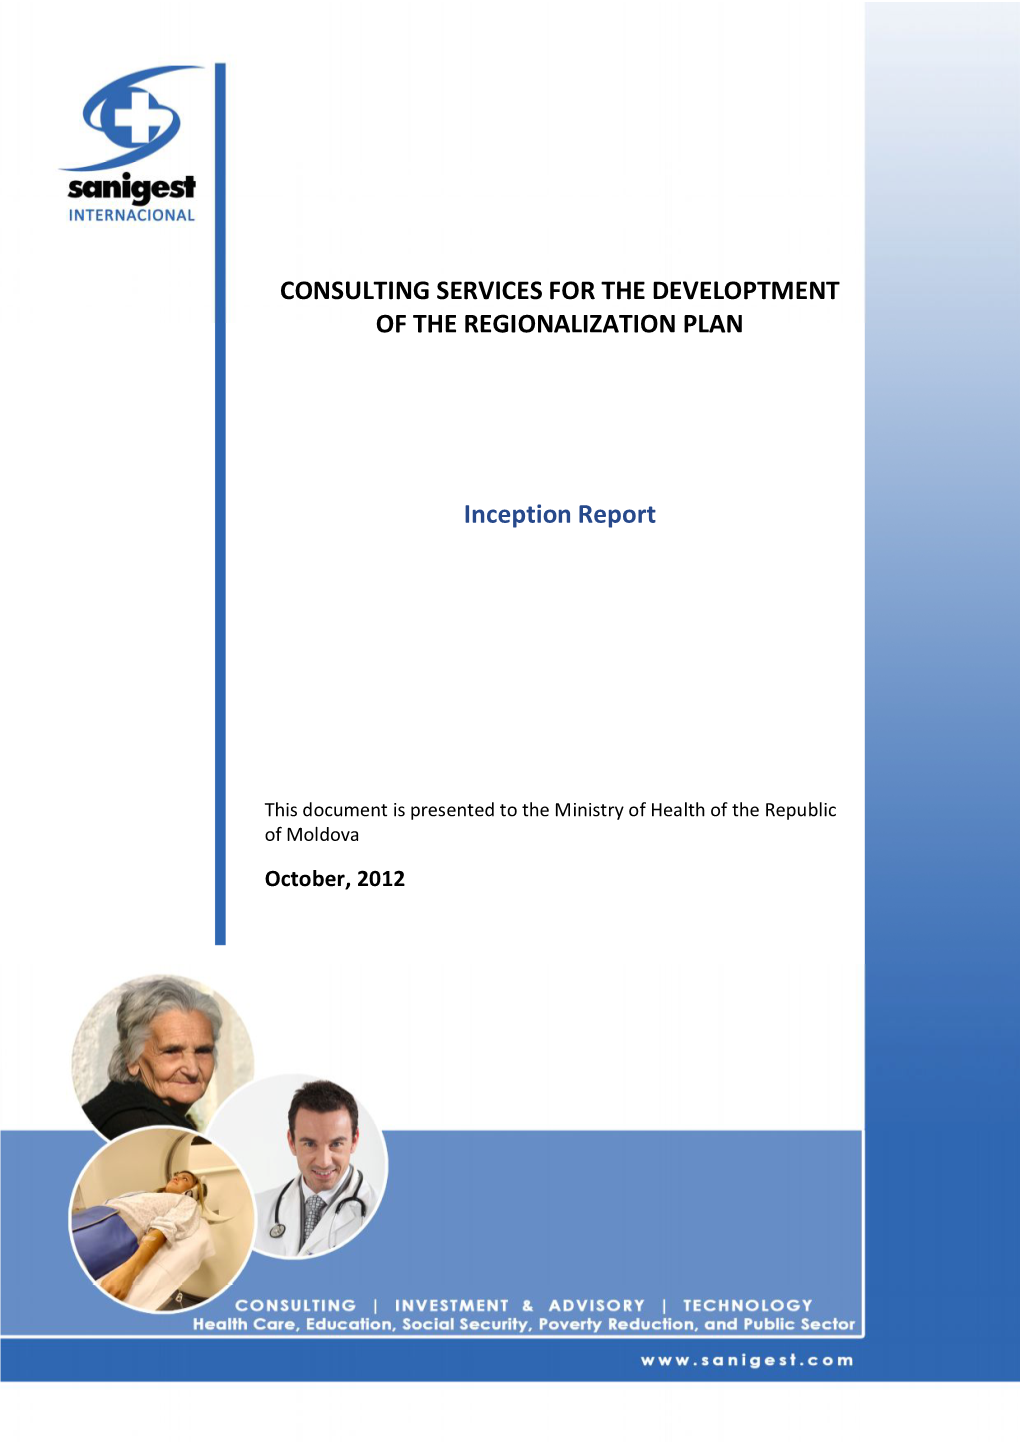 Consulting Services for the Developtment of the Regionalization Plan